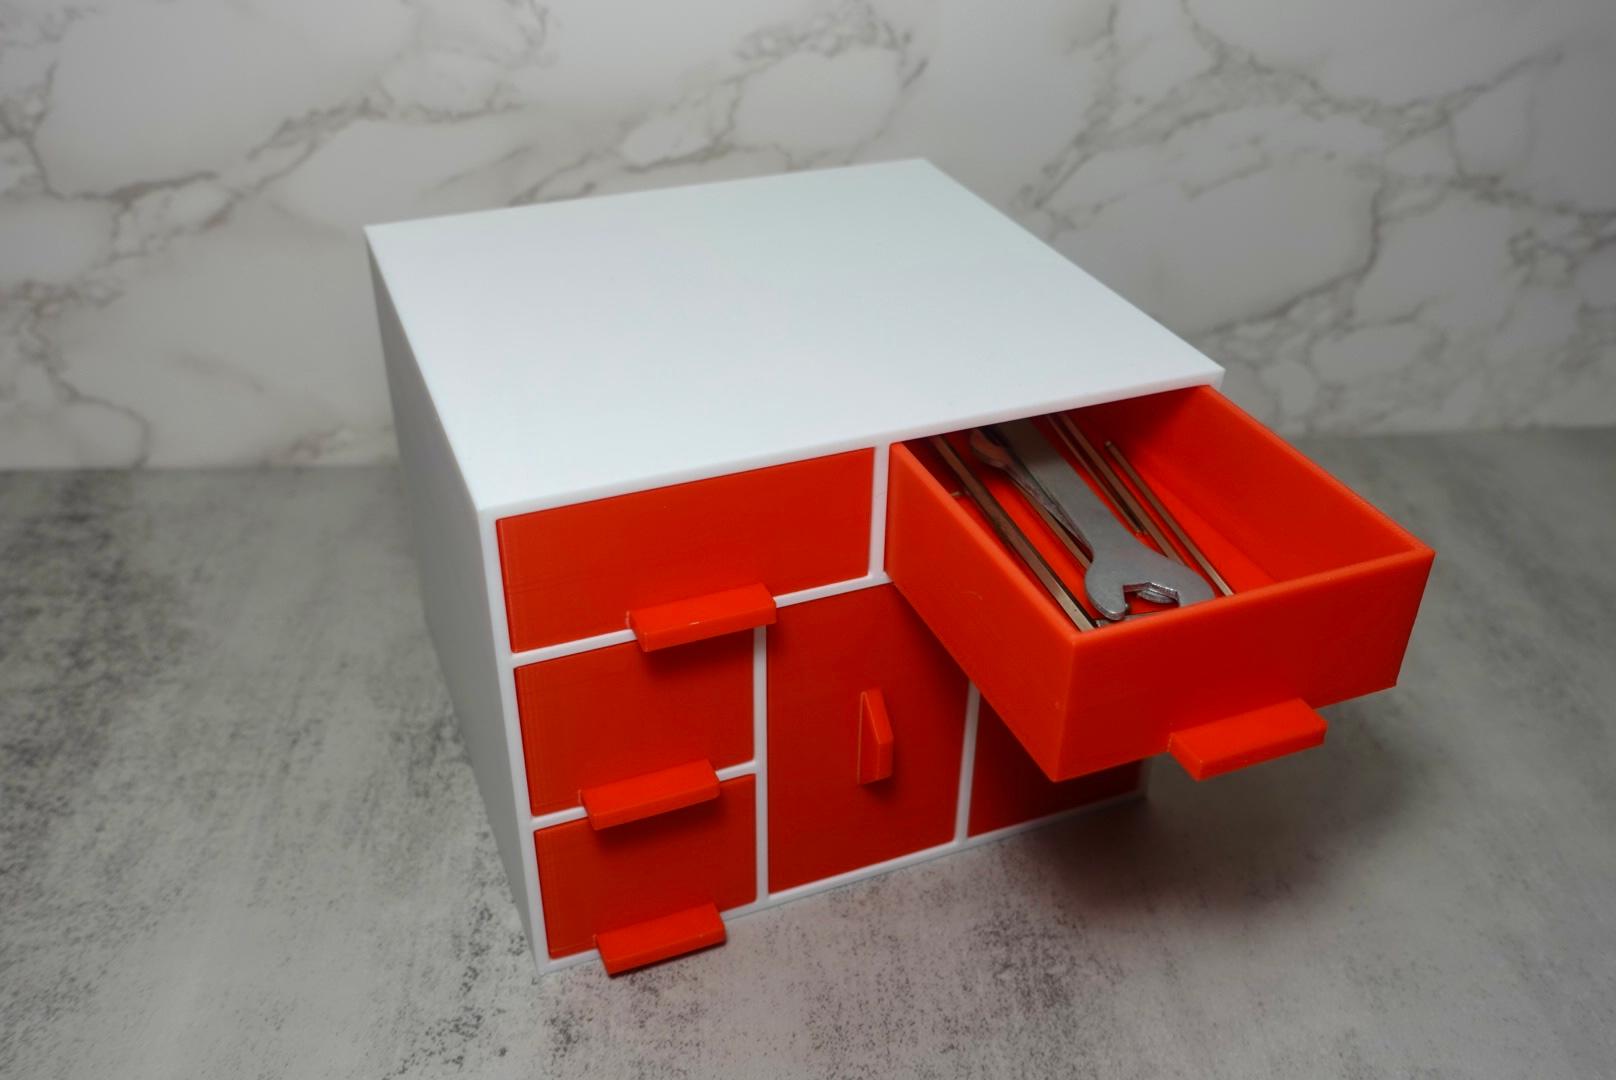 Voron Hardware Organizer EXTENDED REMIX - 3D model by Minesweep on Thangs